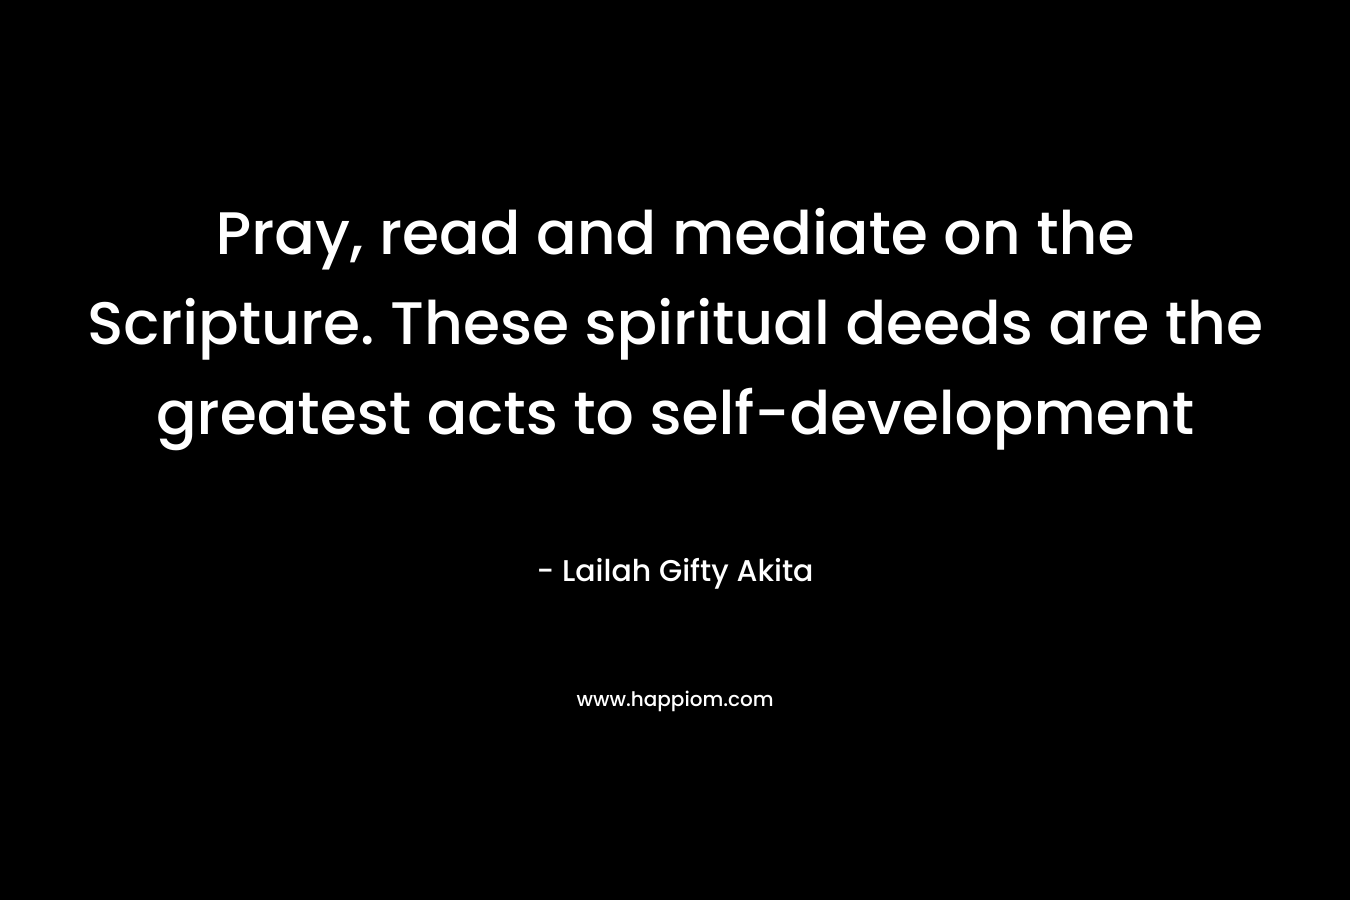 Pray, read and mediate on the Scripture. These spiritual deeds are the greatest acts to self-development